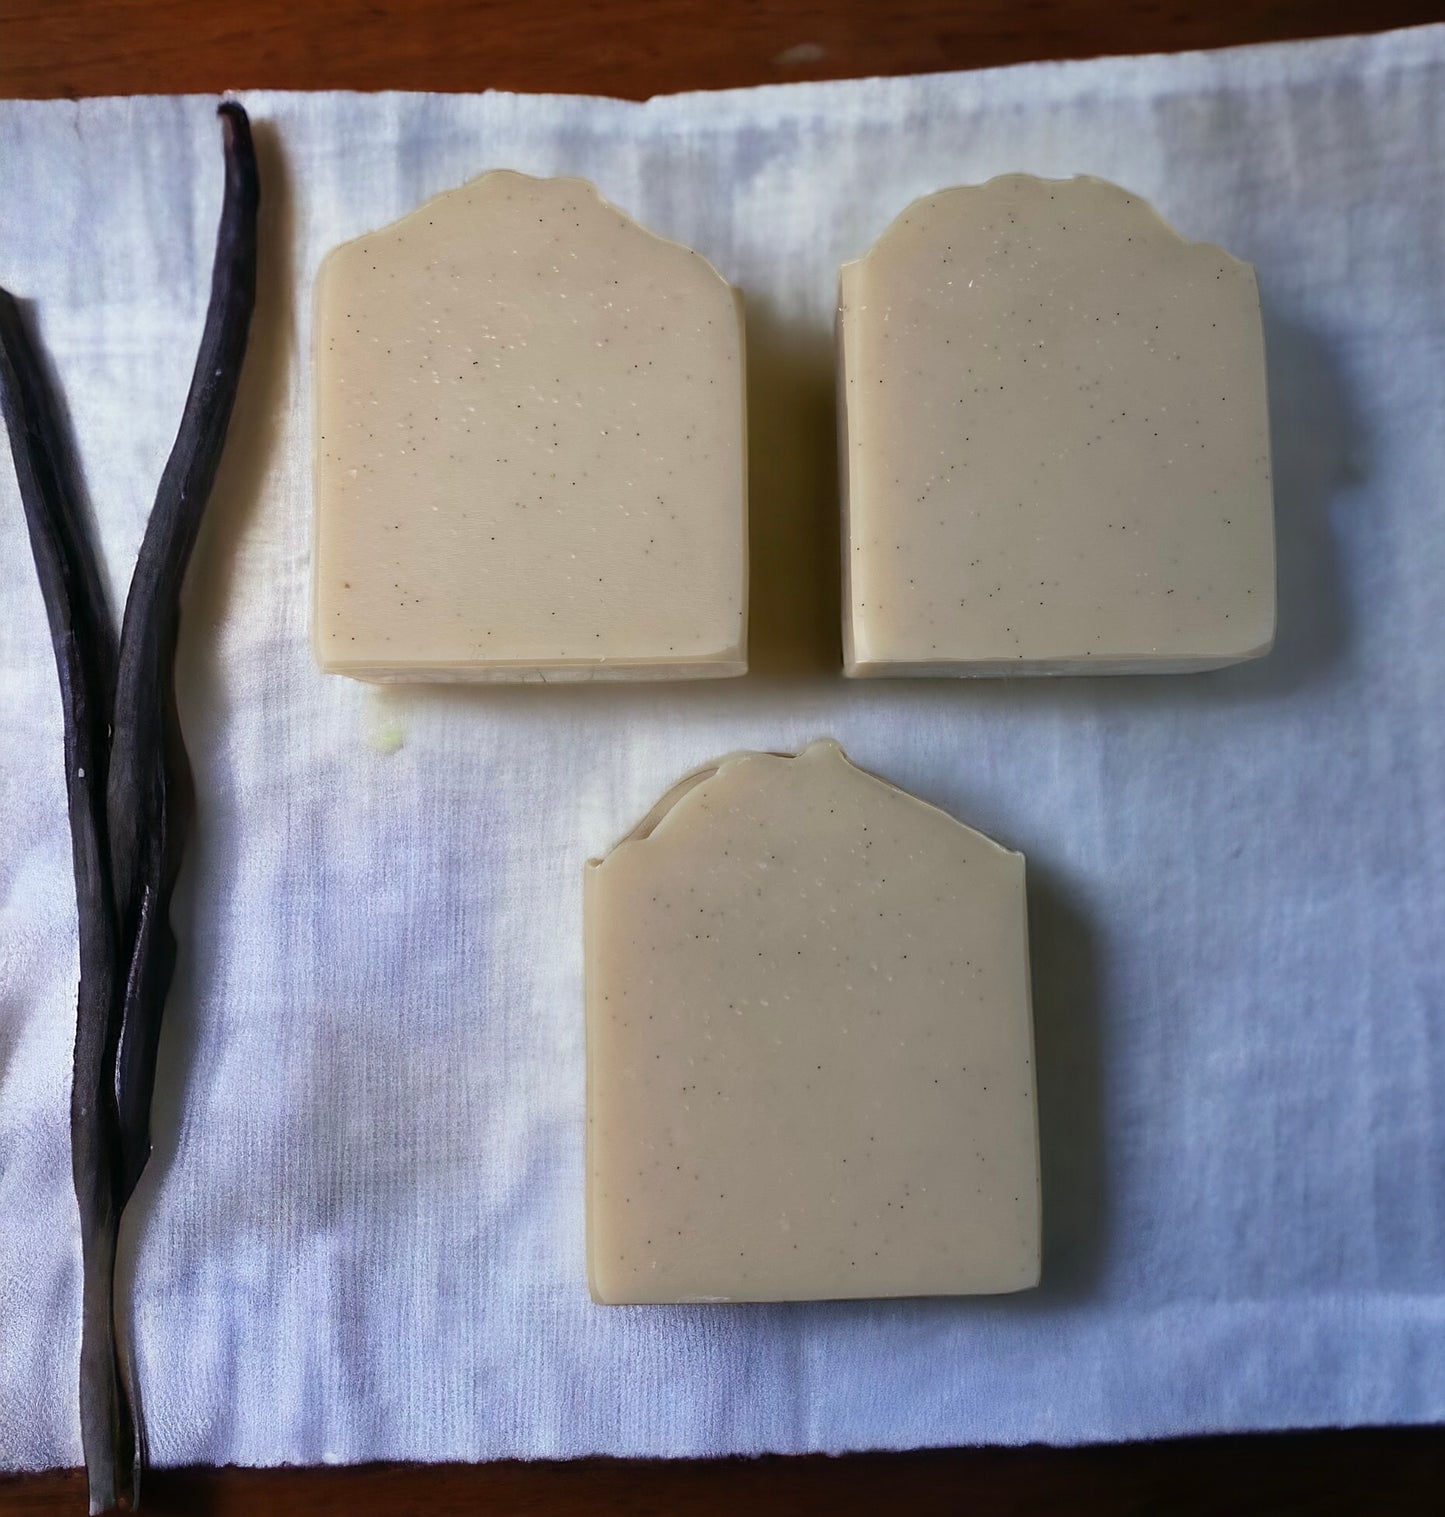 Heavy Cream & Vanilla Bean All Natural Luxury Soap made with Essential Oils